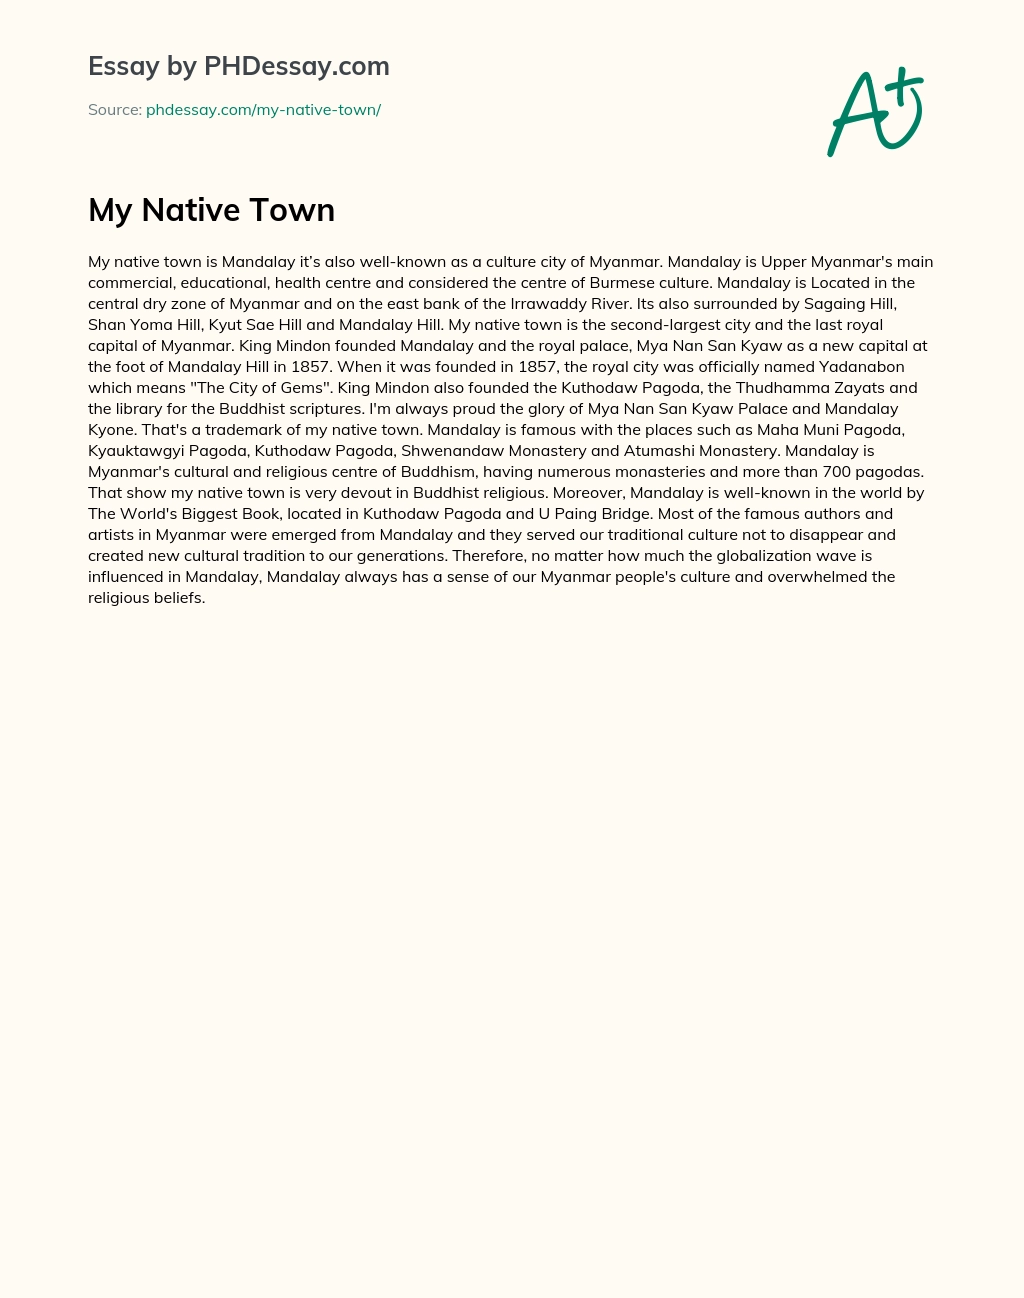 essay on my native town